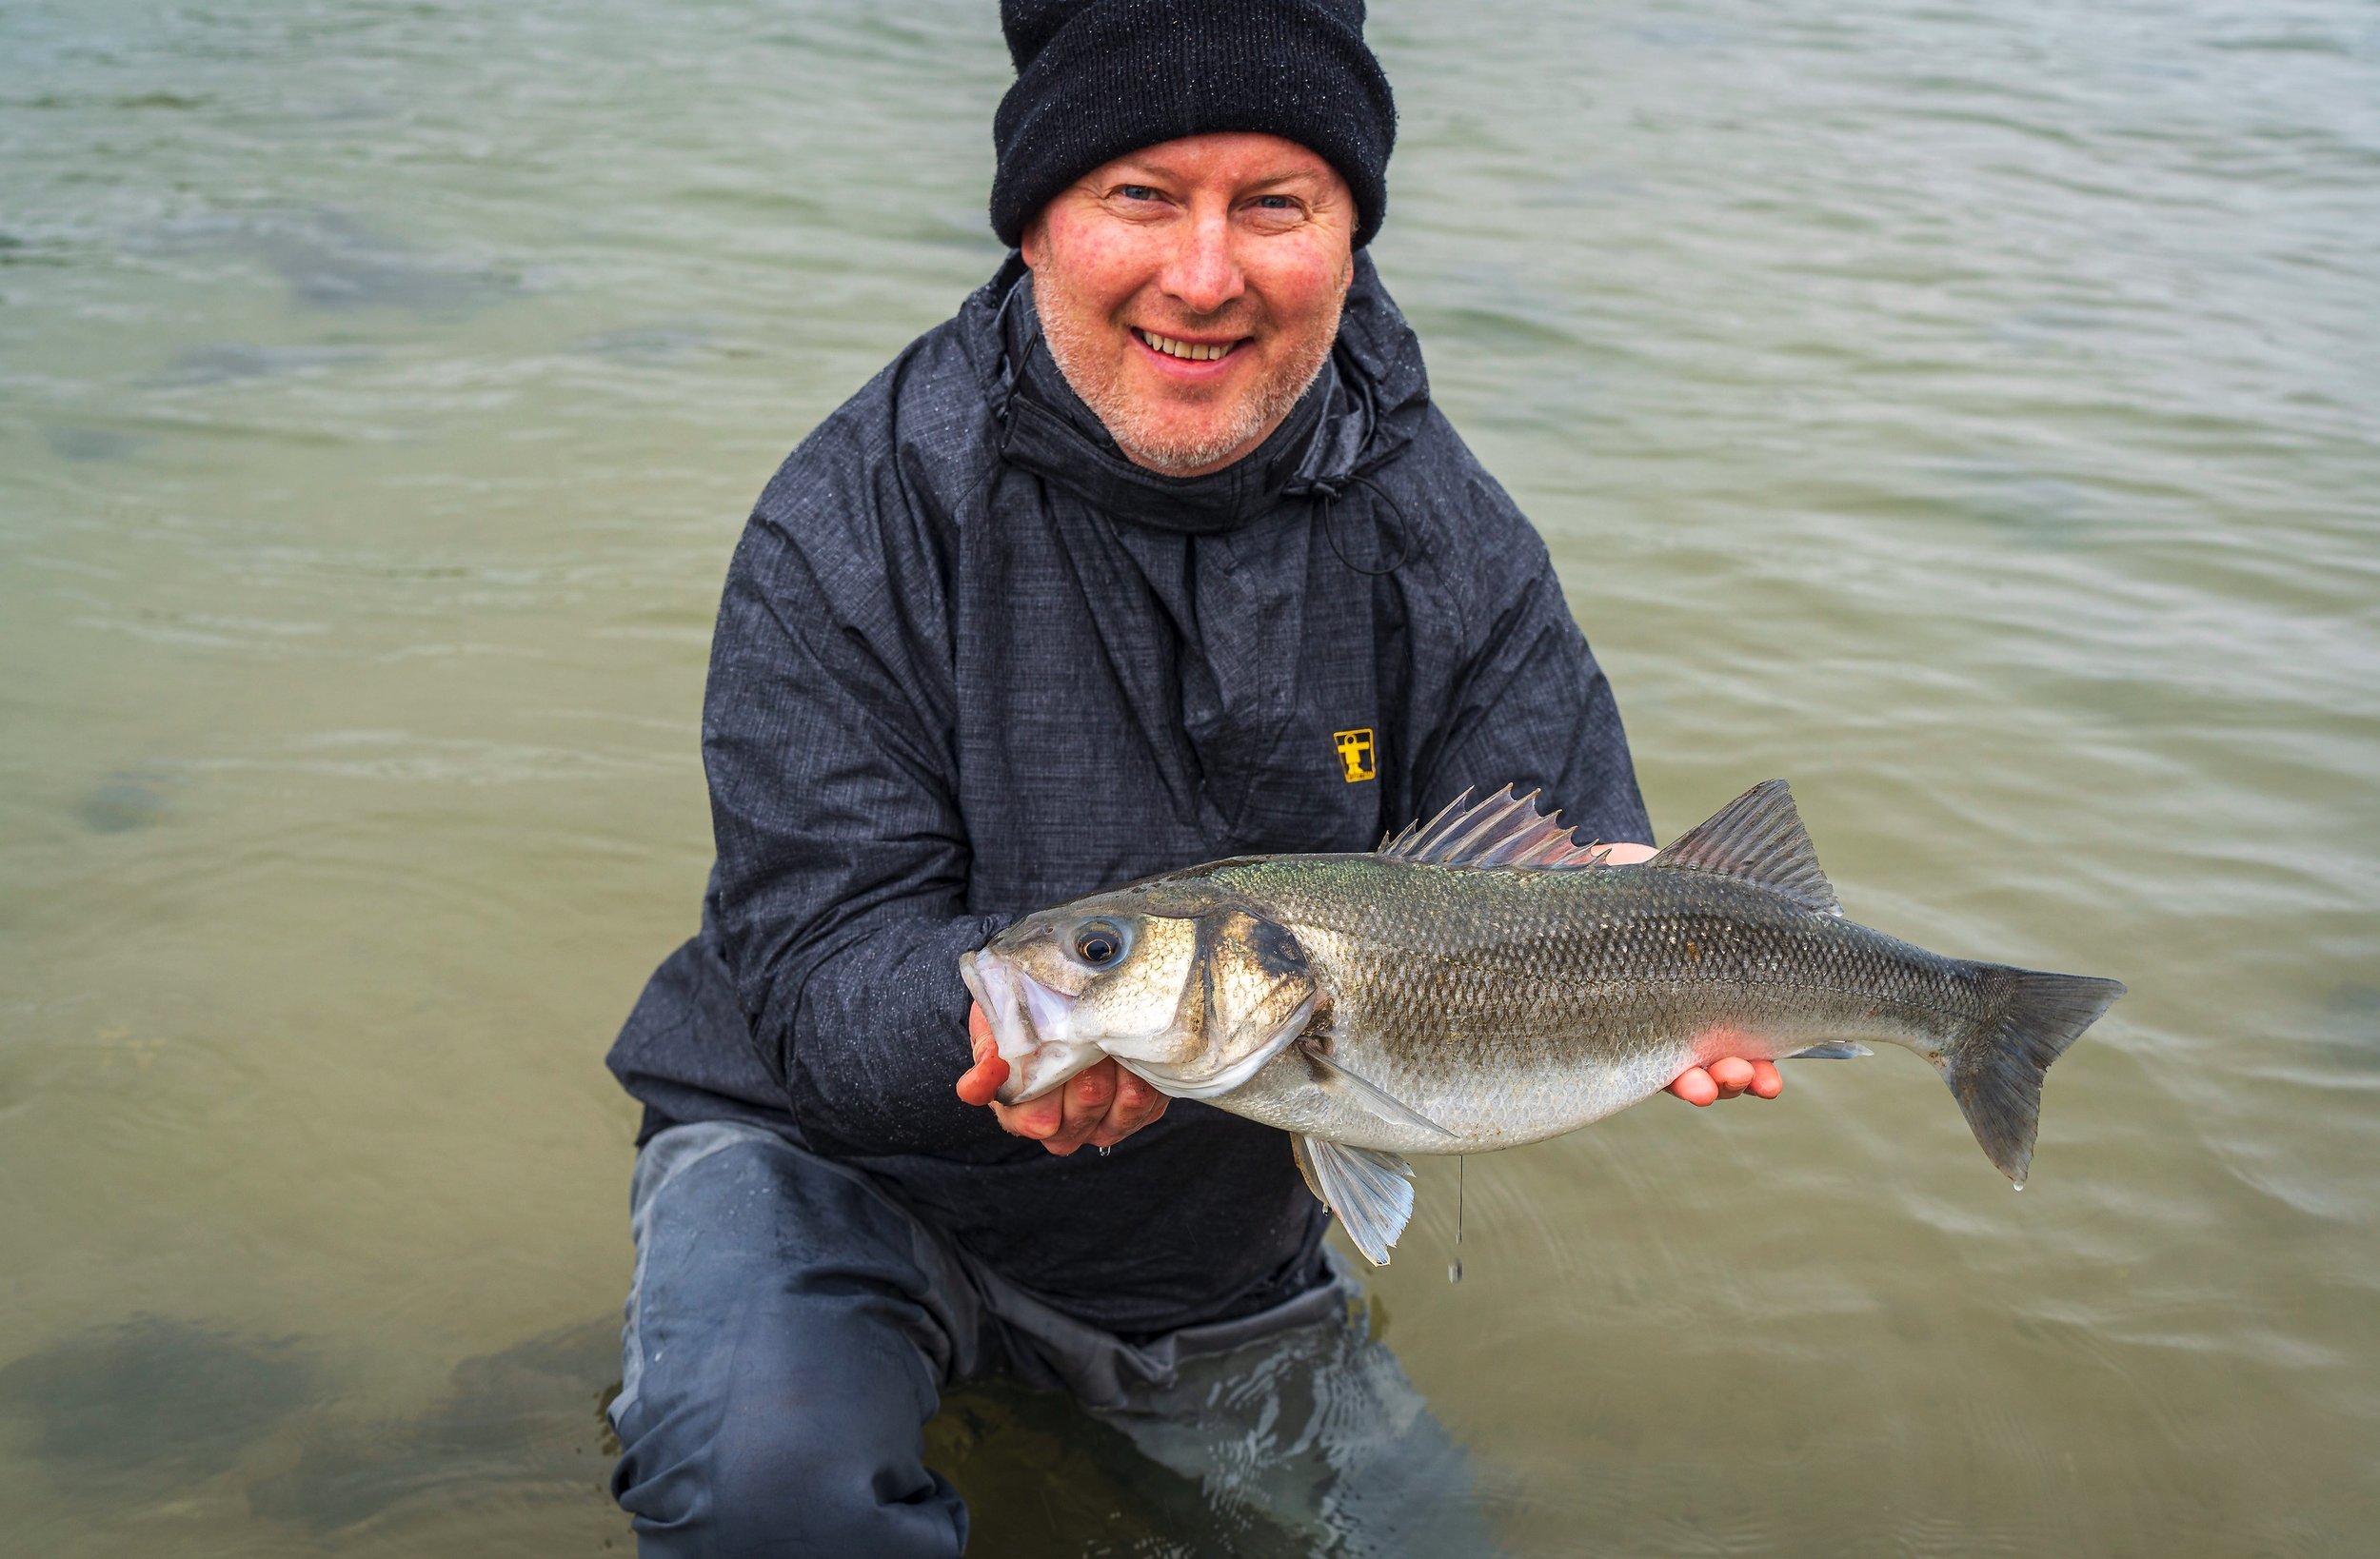 A nice March bass was caught, but worry not, my 100% record is still  intact! — Henry Gilbey